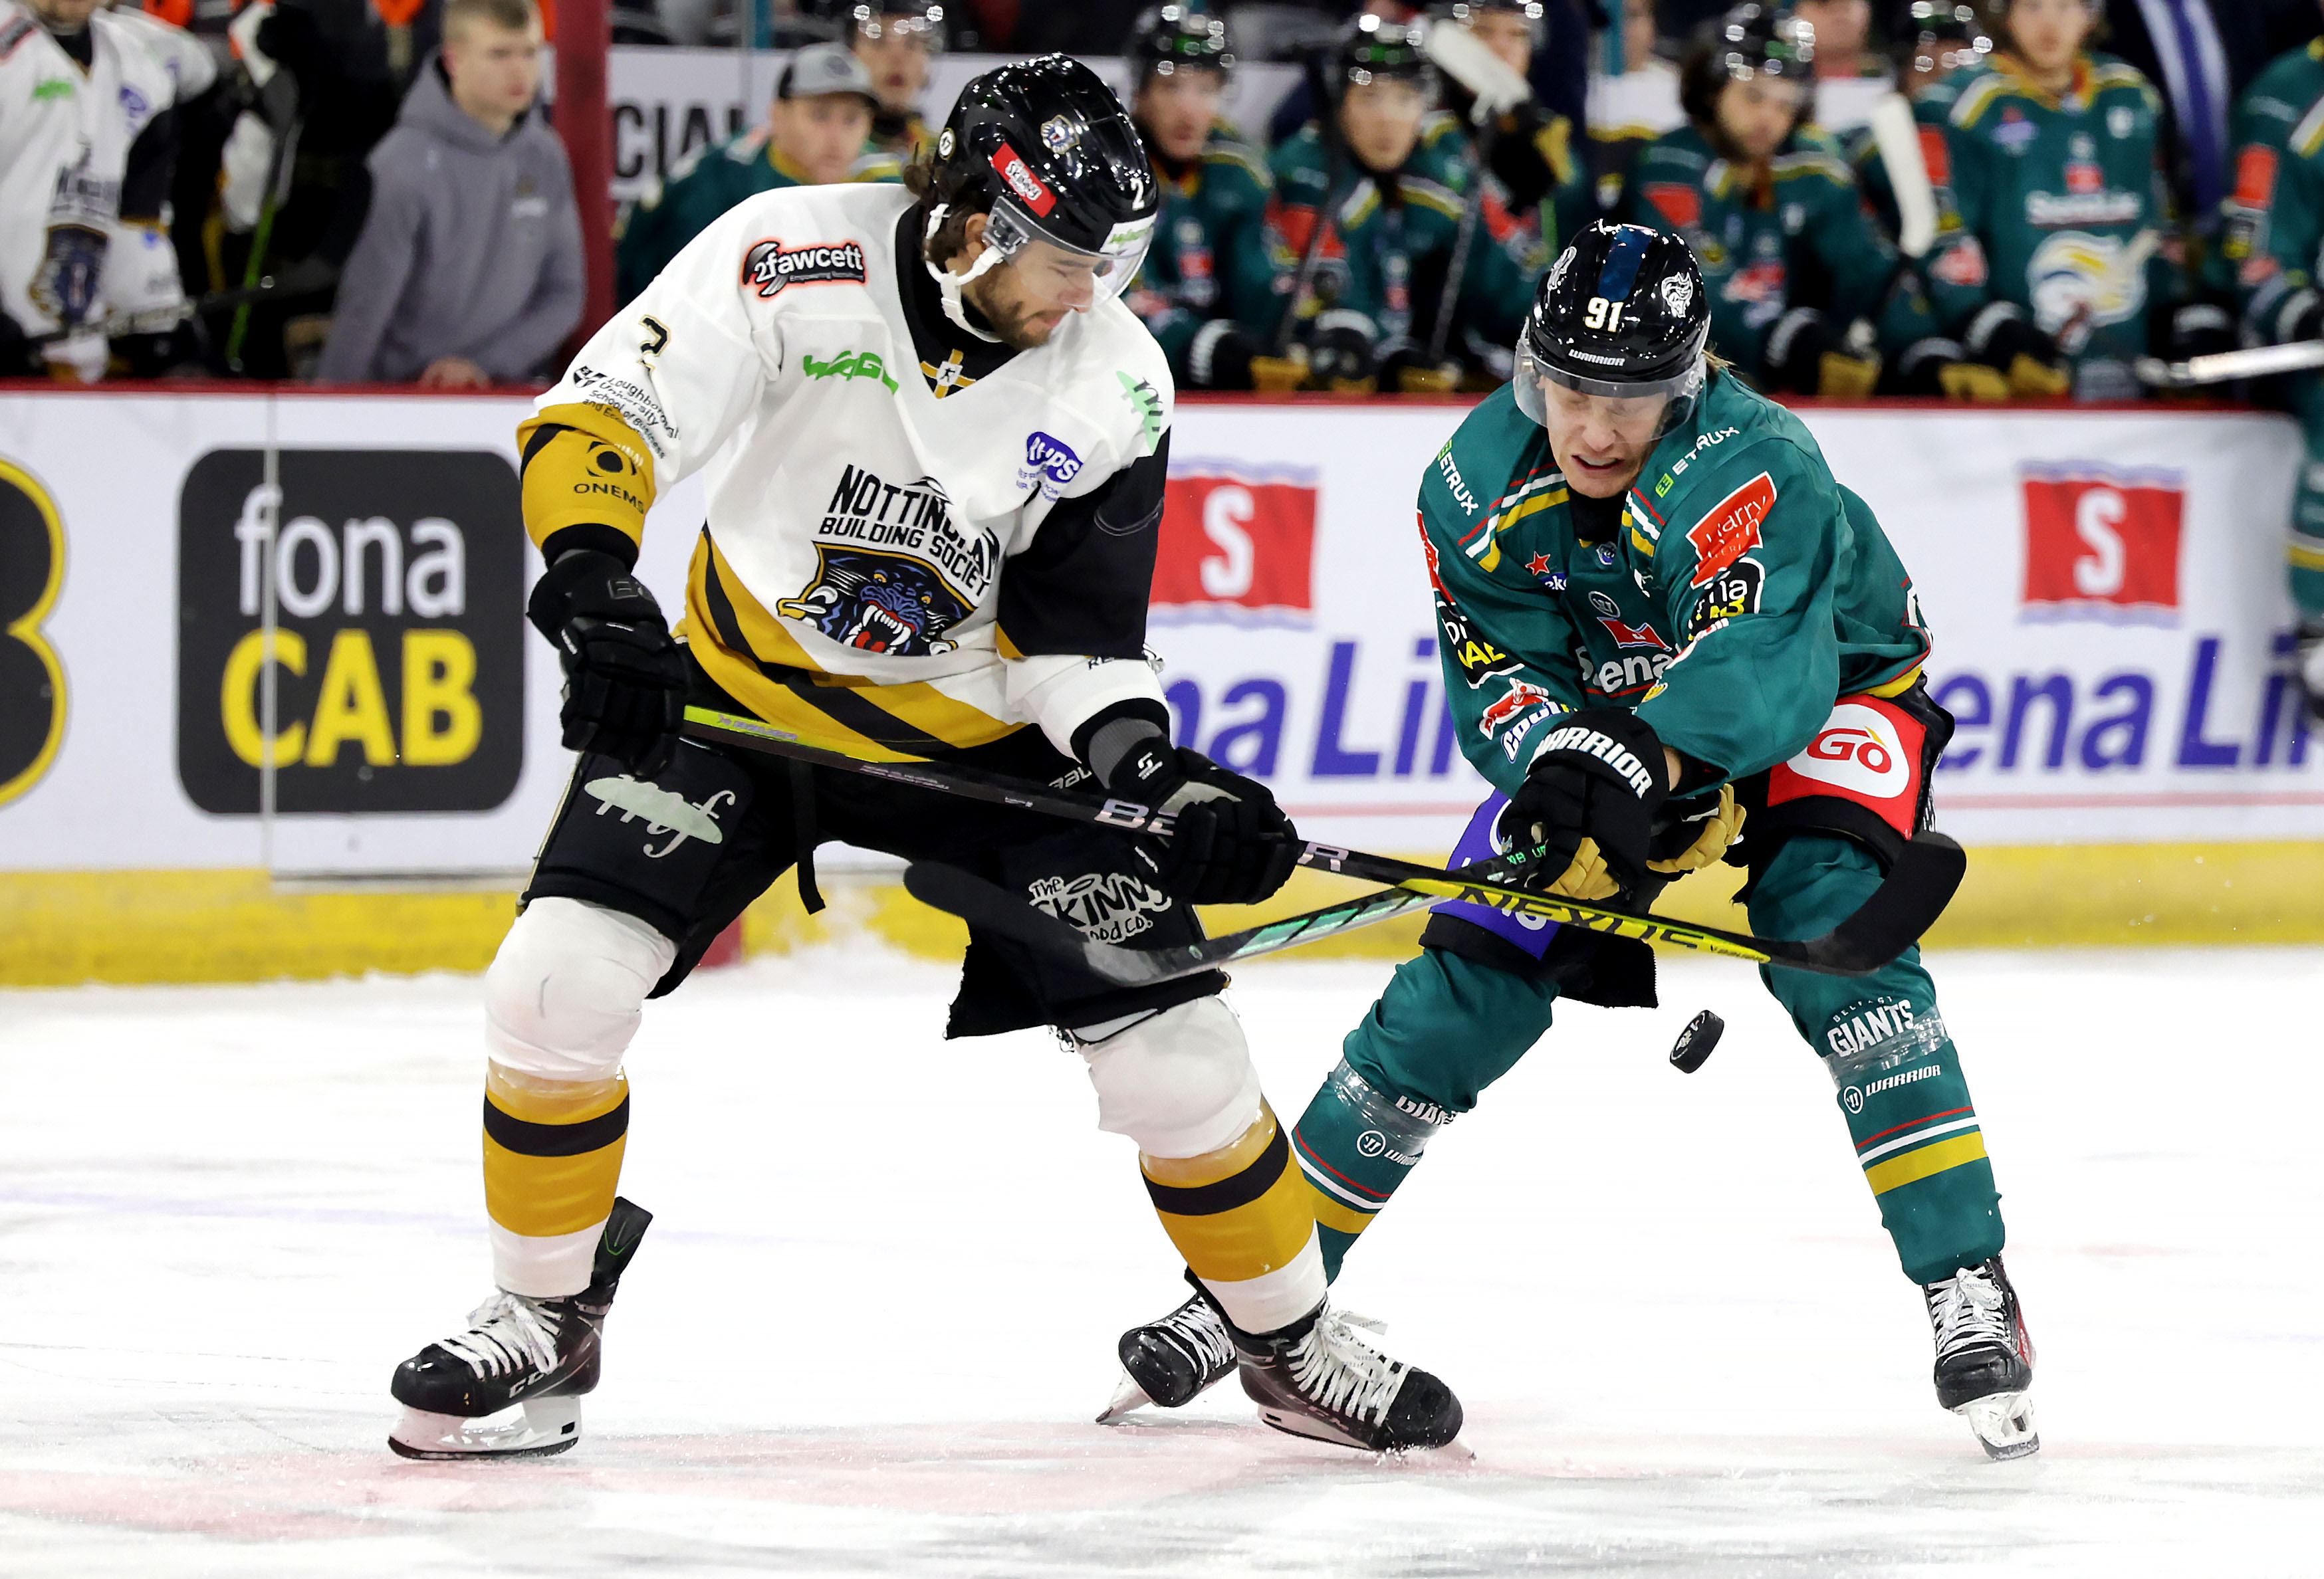 FINAL SCORE: BELFAST 4-3 PANTHERS Top Image